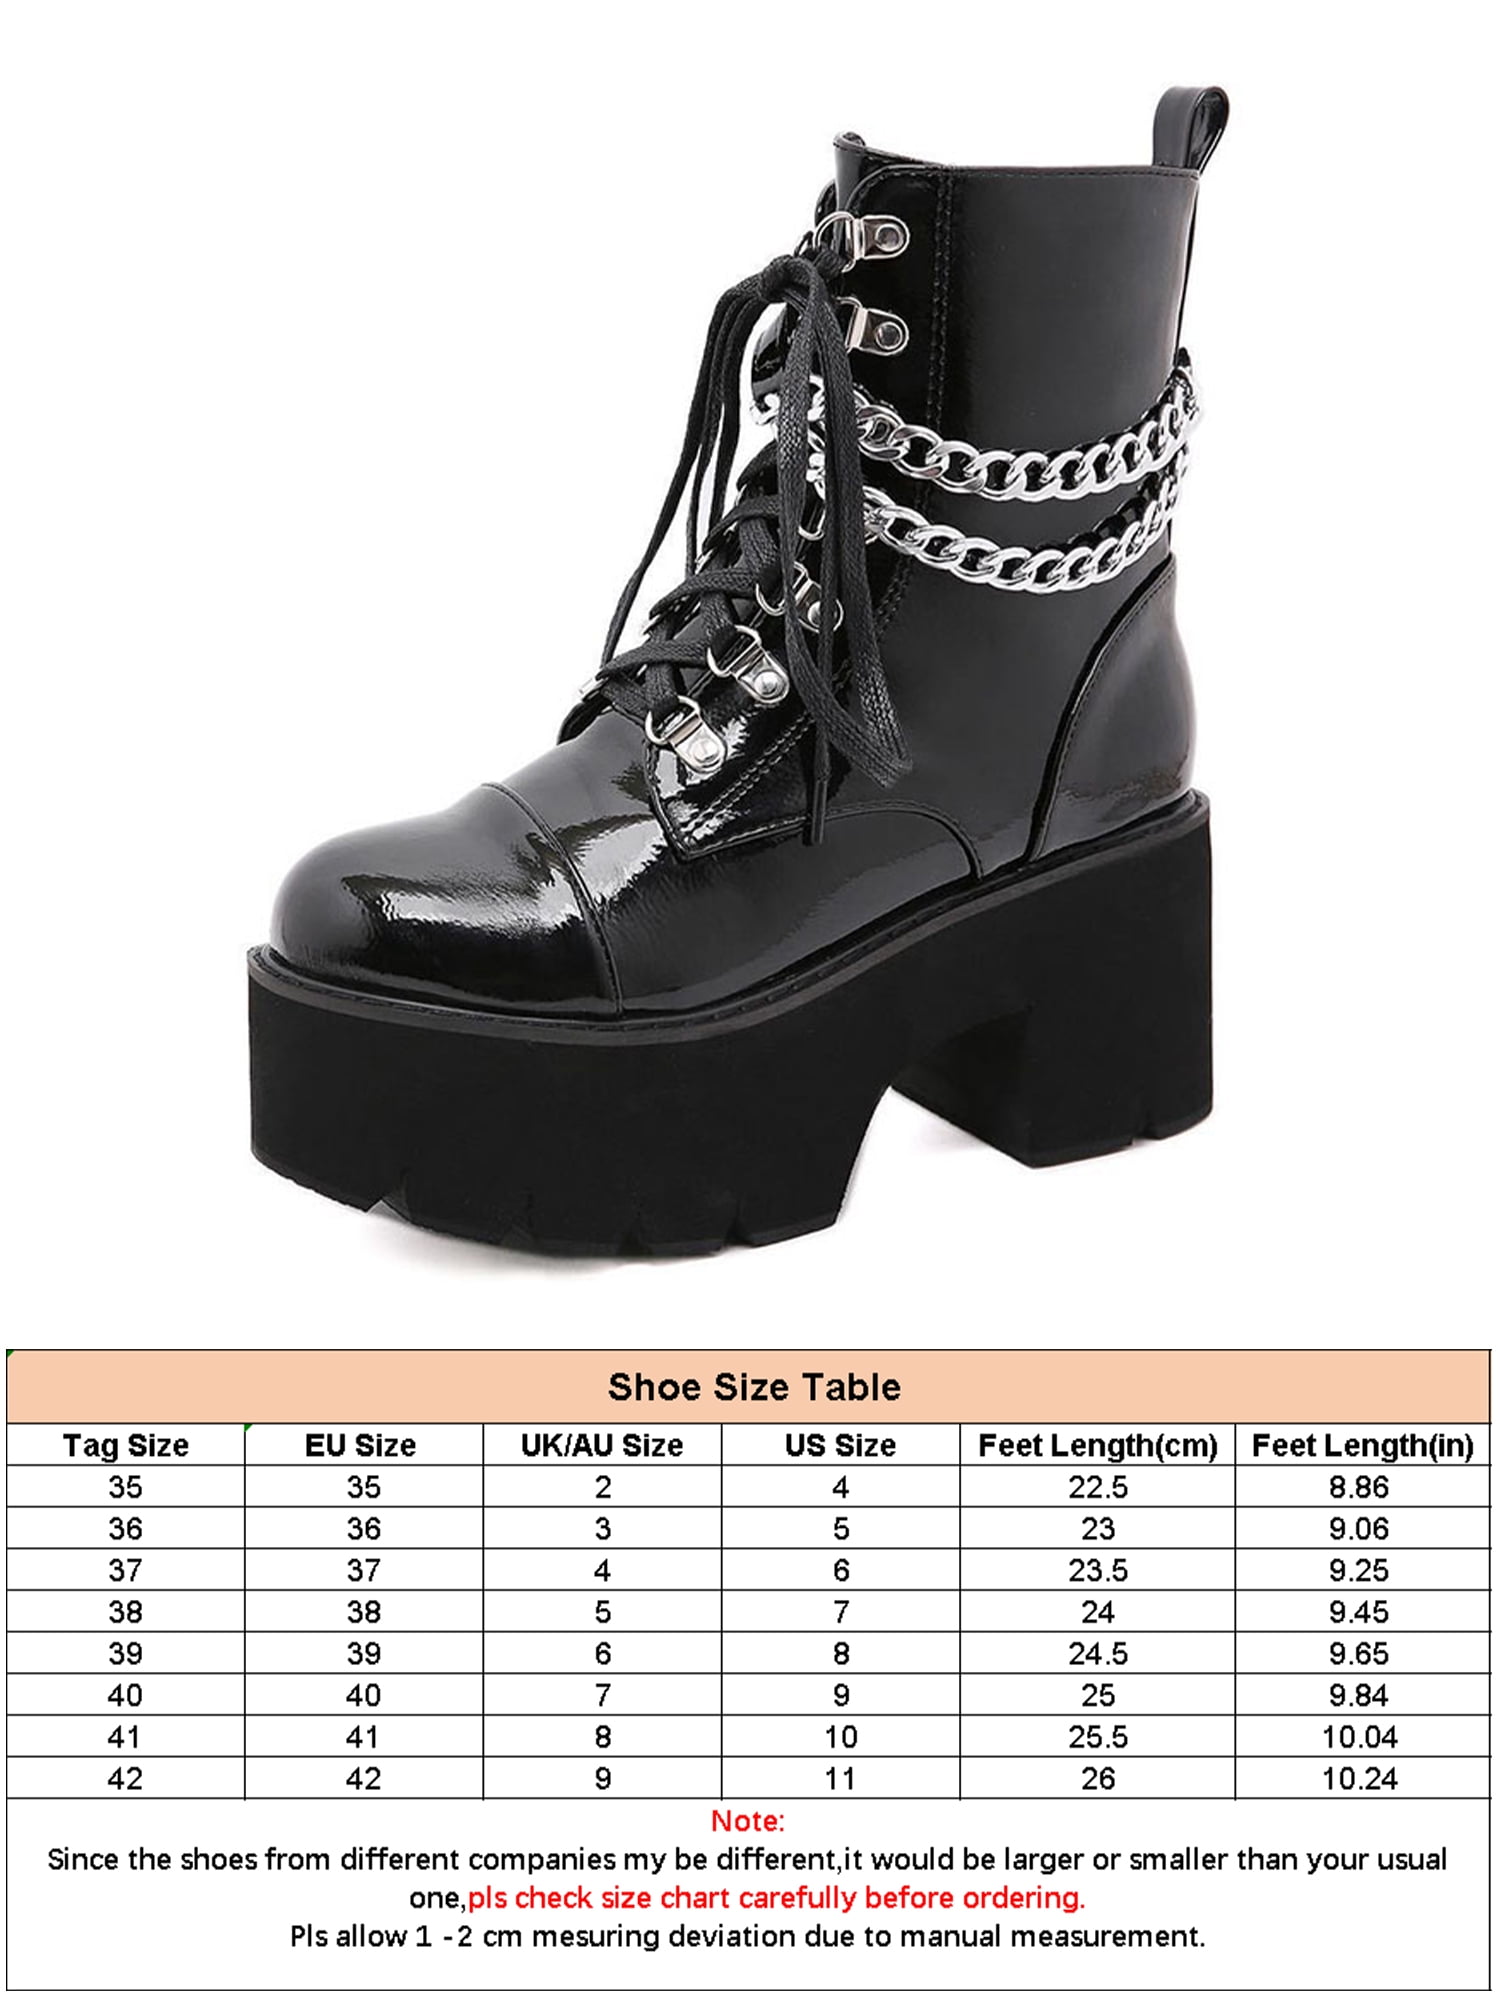 Gomelly Women's High Heel Booties Thick Sole Platform Combat Ankle Boots Black/White, Size: One Size